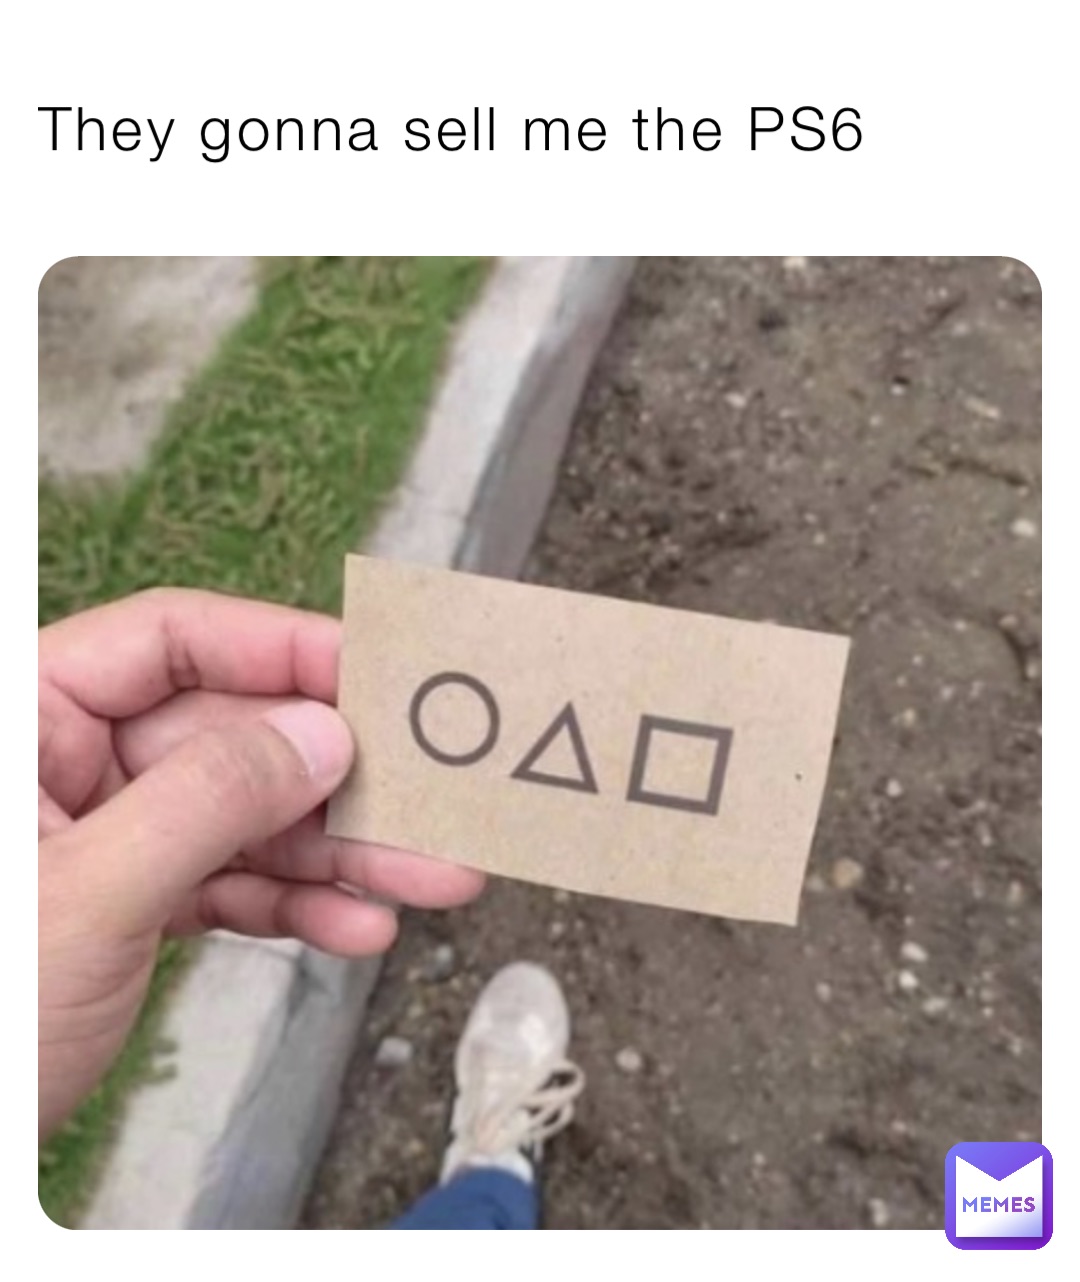 They gonna sell me the PS6